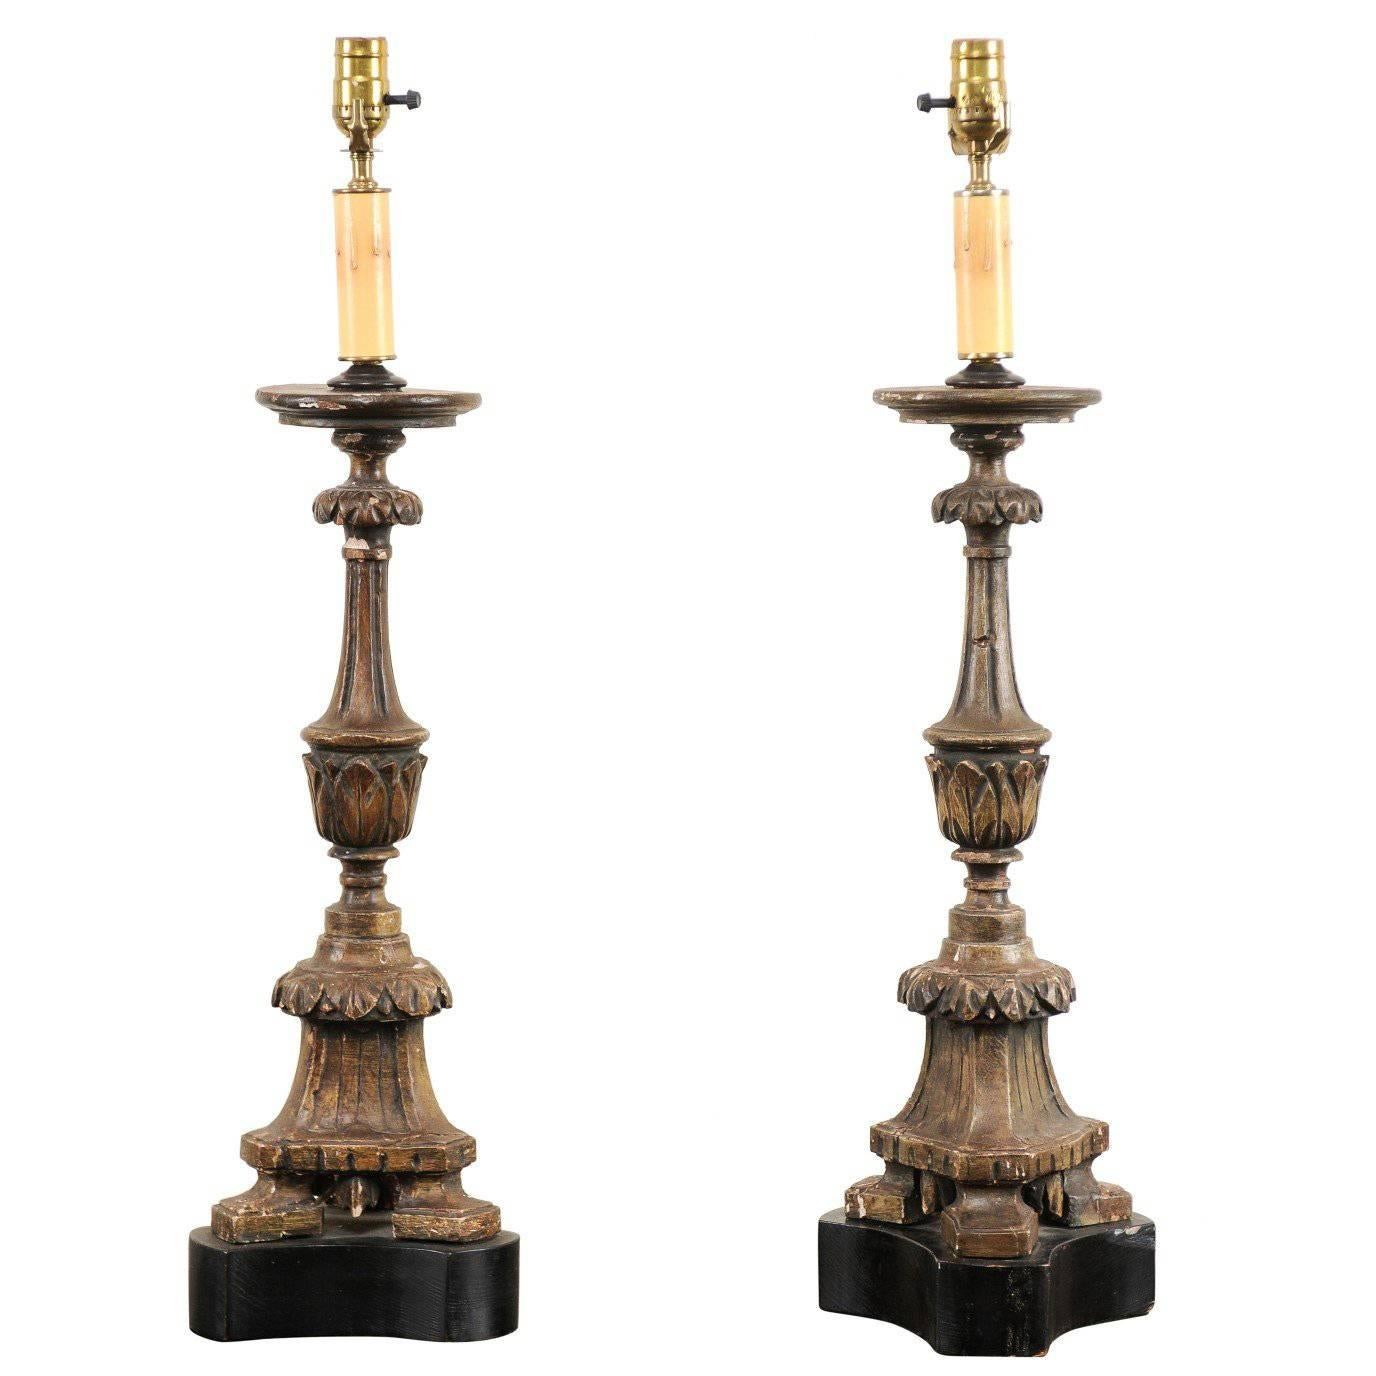 Pair of 19th Century Italian Carved Wood Altar Sticks Made into Tall Table Lamps